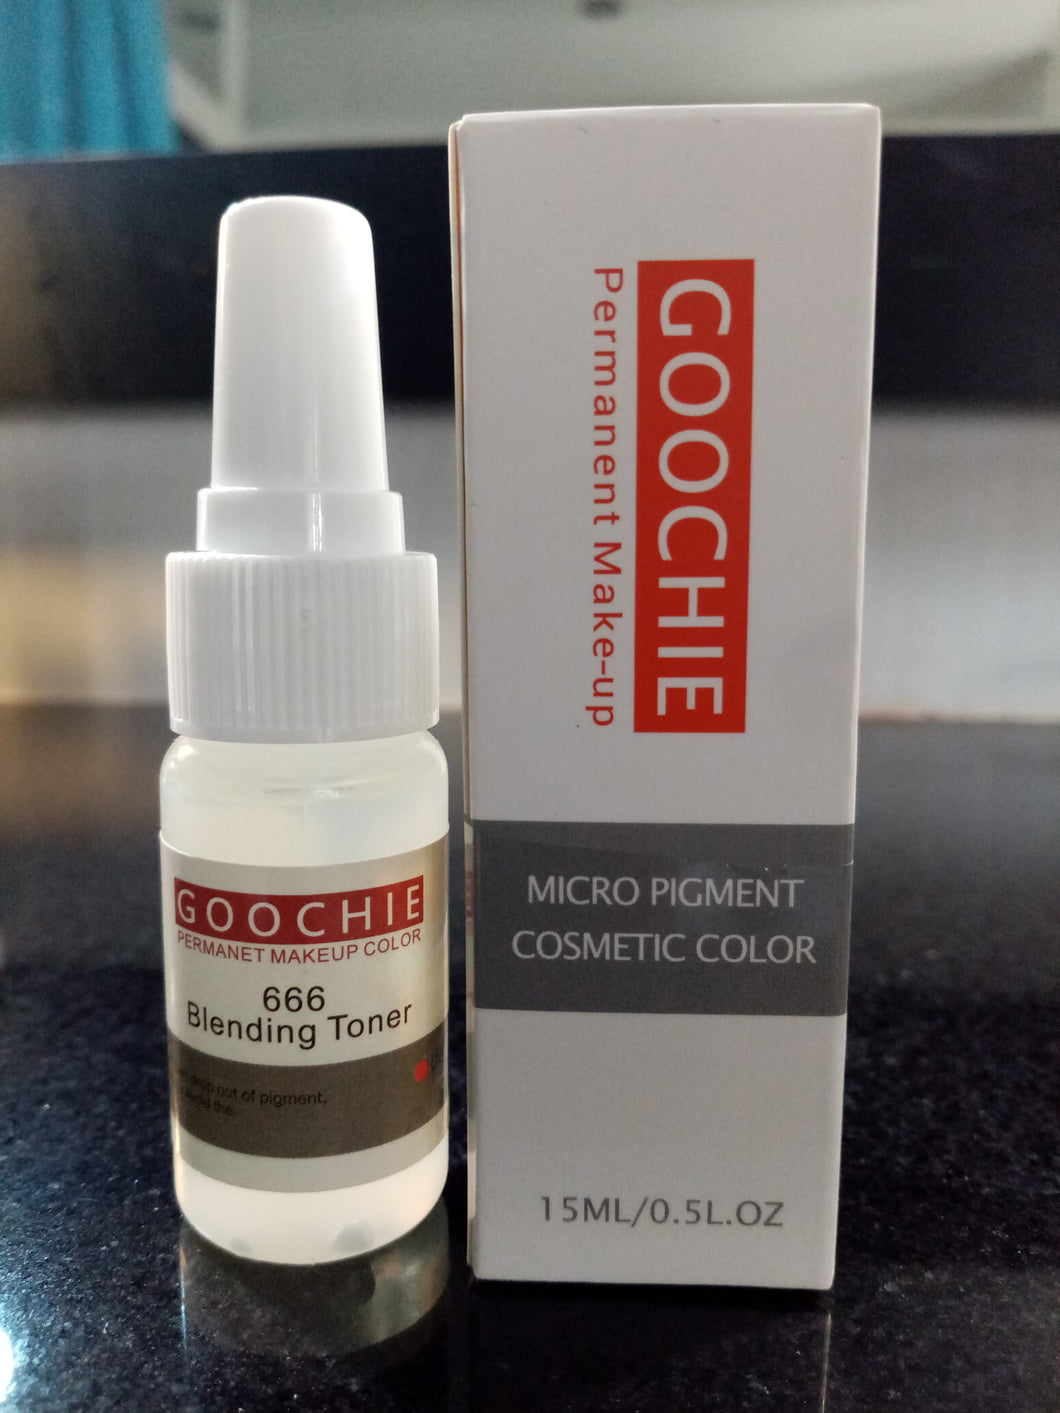 Goochie Blending Toner for Semi-Permanent Cheek Blush or other Cosmetic Tattoo